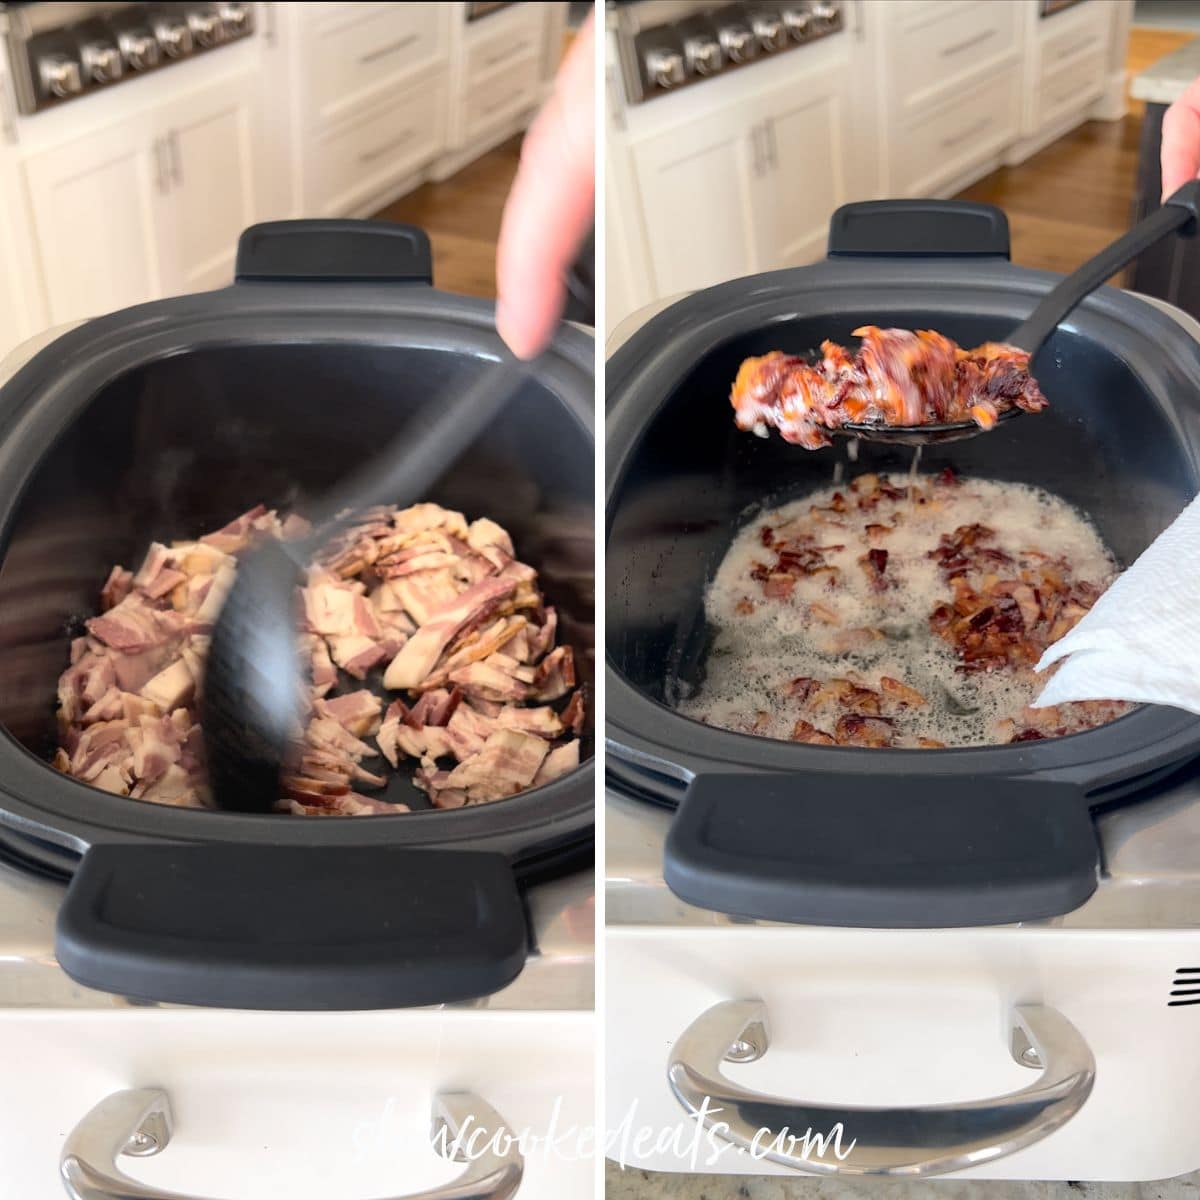 Cooking bacon in a black crock pot.